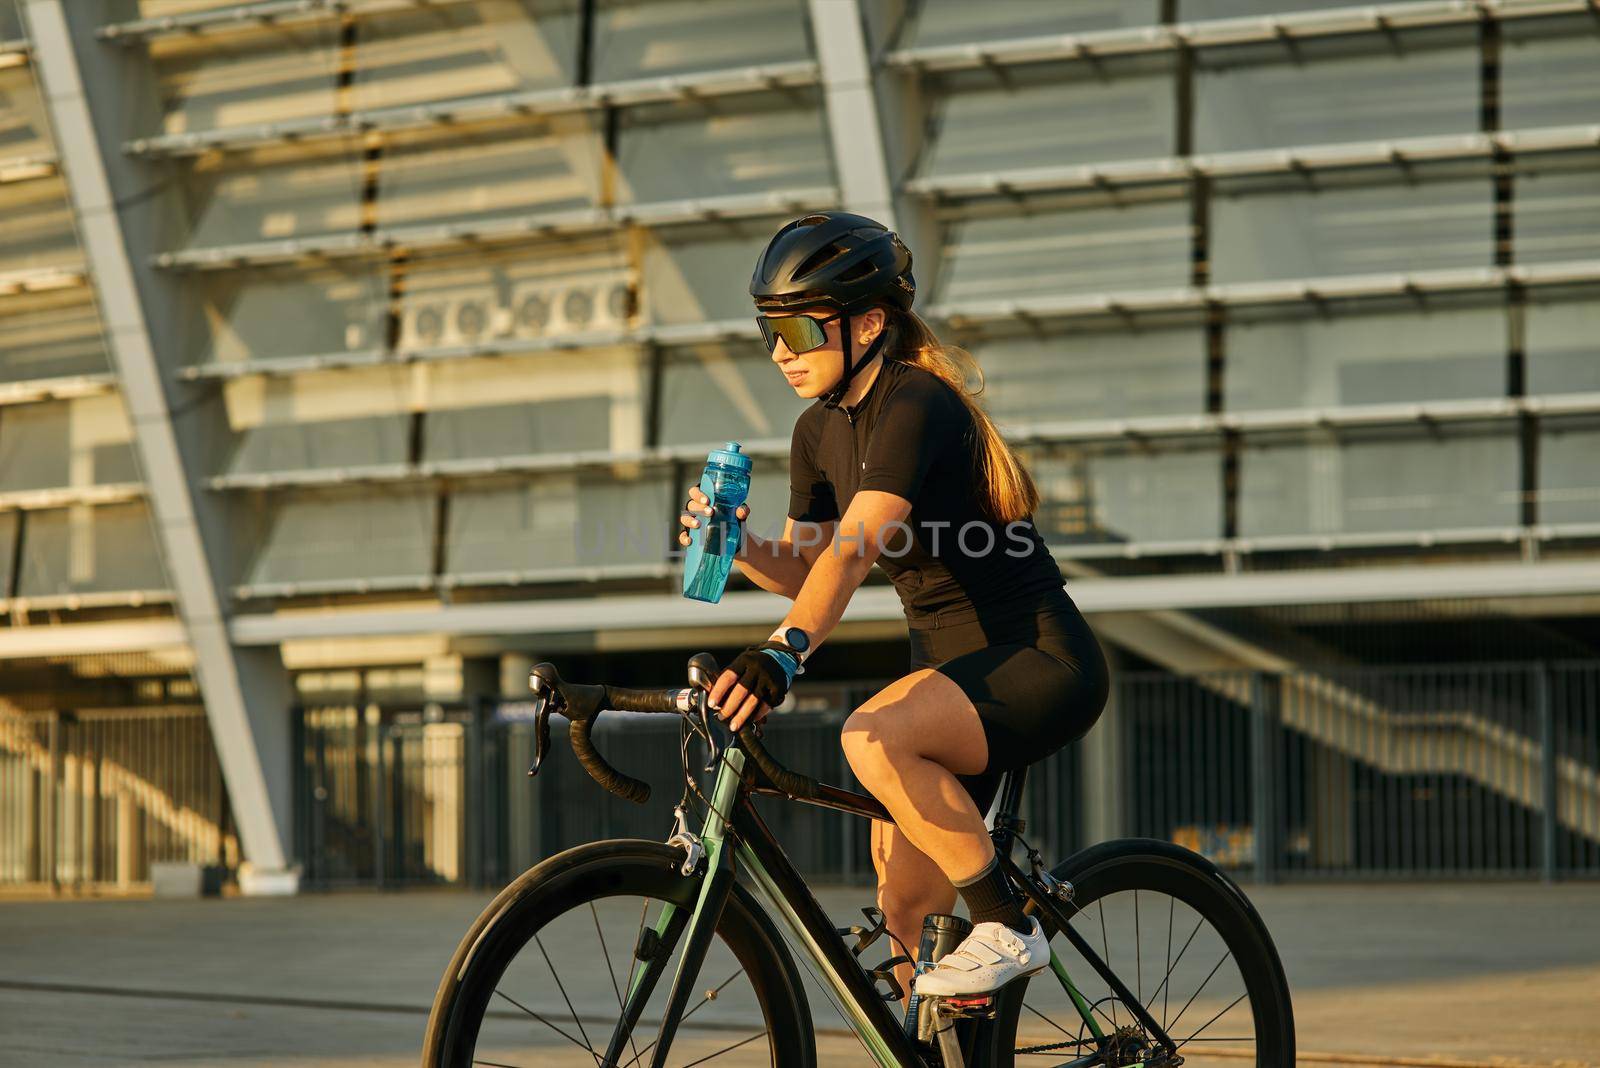 Professional female cyclist in black cycling garment and protective gear holding water bottle while riding bicycle in city, training outdoors at sunset. Urban lifestyle, sports concept